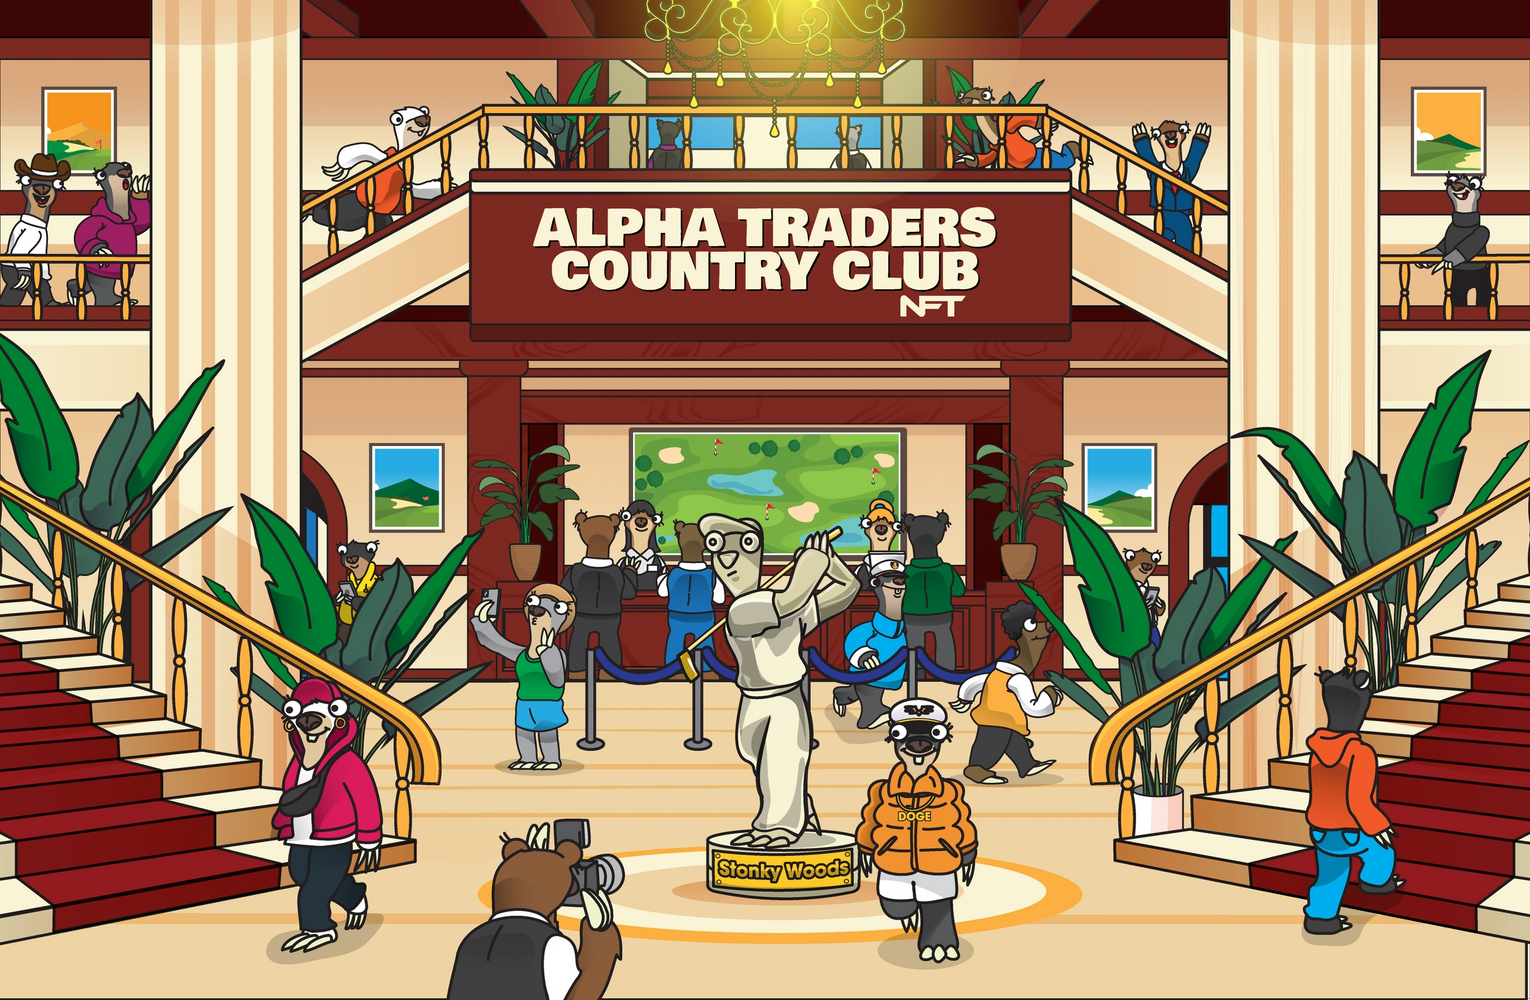 Front desk of the Alpha Traders Country Club